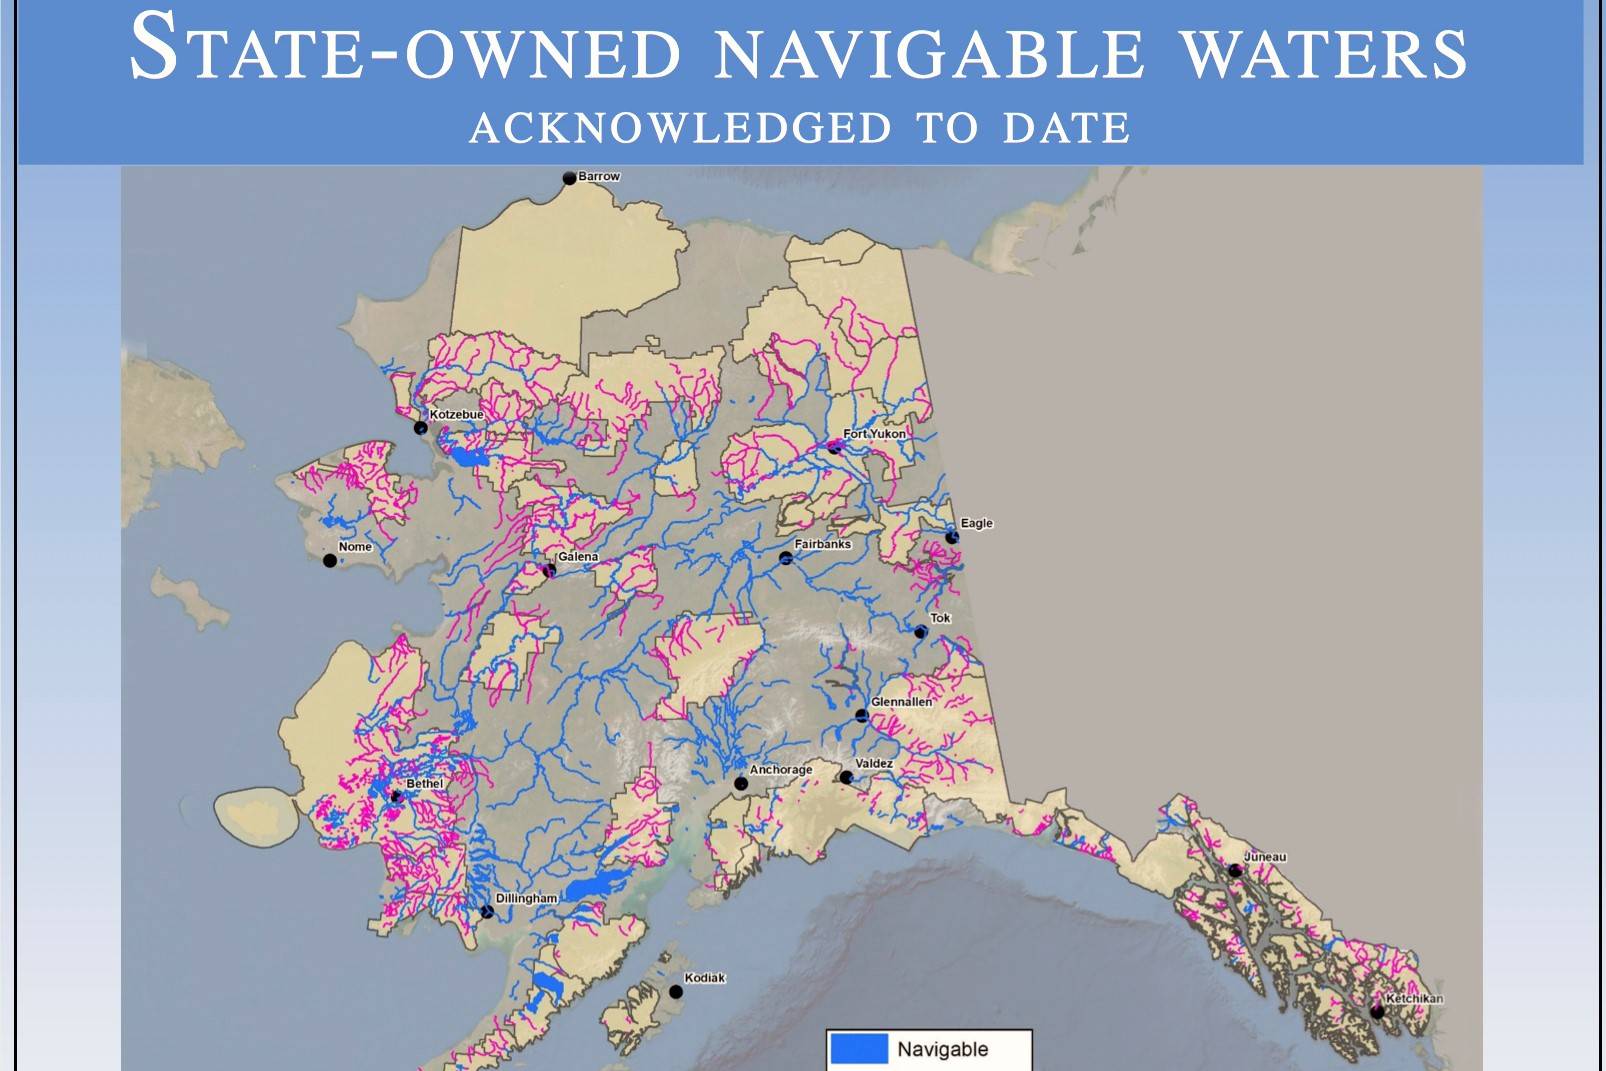 Screenshot
This screenshot of a presentation included in a Friday afternoon news conference shows state-owned waterways.